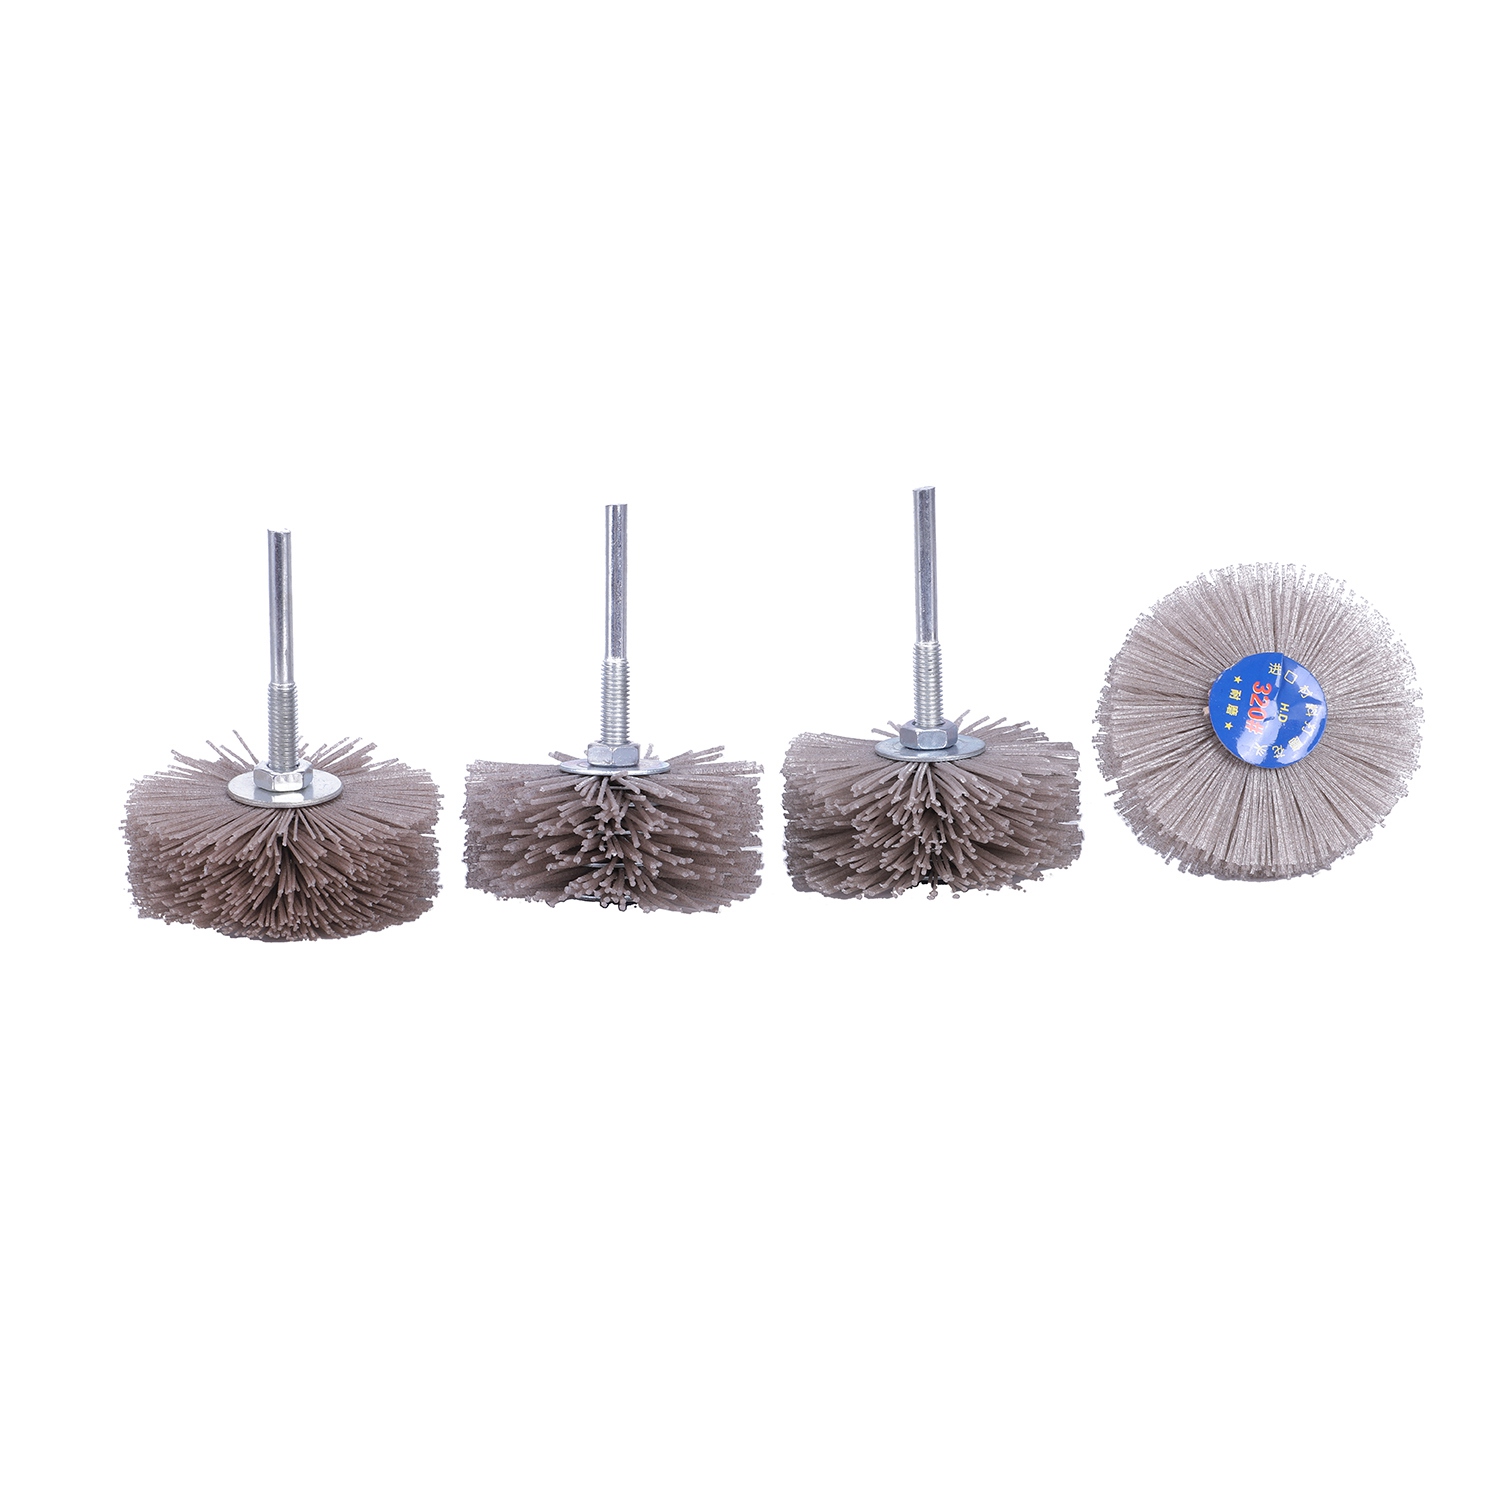 WSFS Hot 4 pieces P120 P180 P240 P320 85 x 35 x 6mm Drill Abrasive Wire Grinding Wheel Nylon Bristle Polishing Brush for Wood